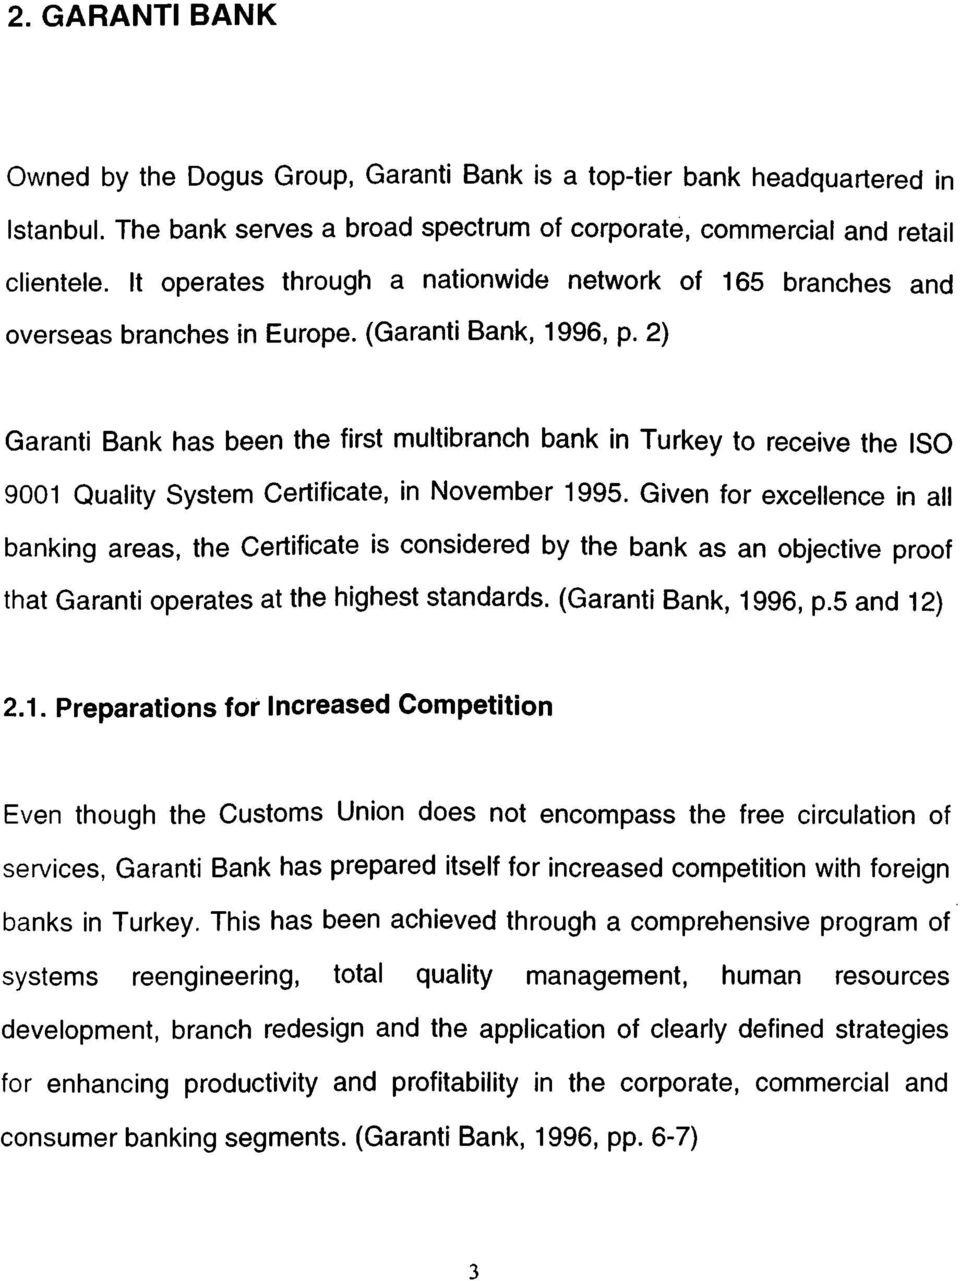 2) Grnti Bnk hs been the first multibrnh bnk in Turkey t reeive the IS 91 Qulity System Certifite, in Nvember 1995.